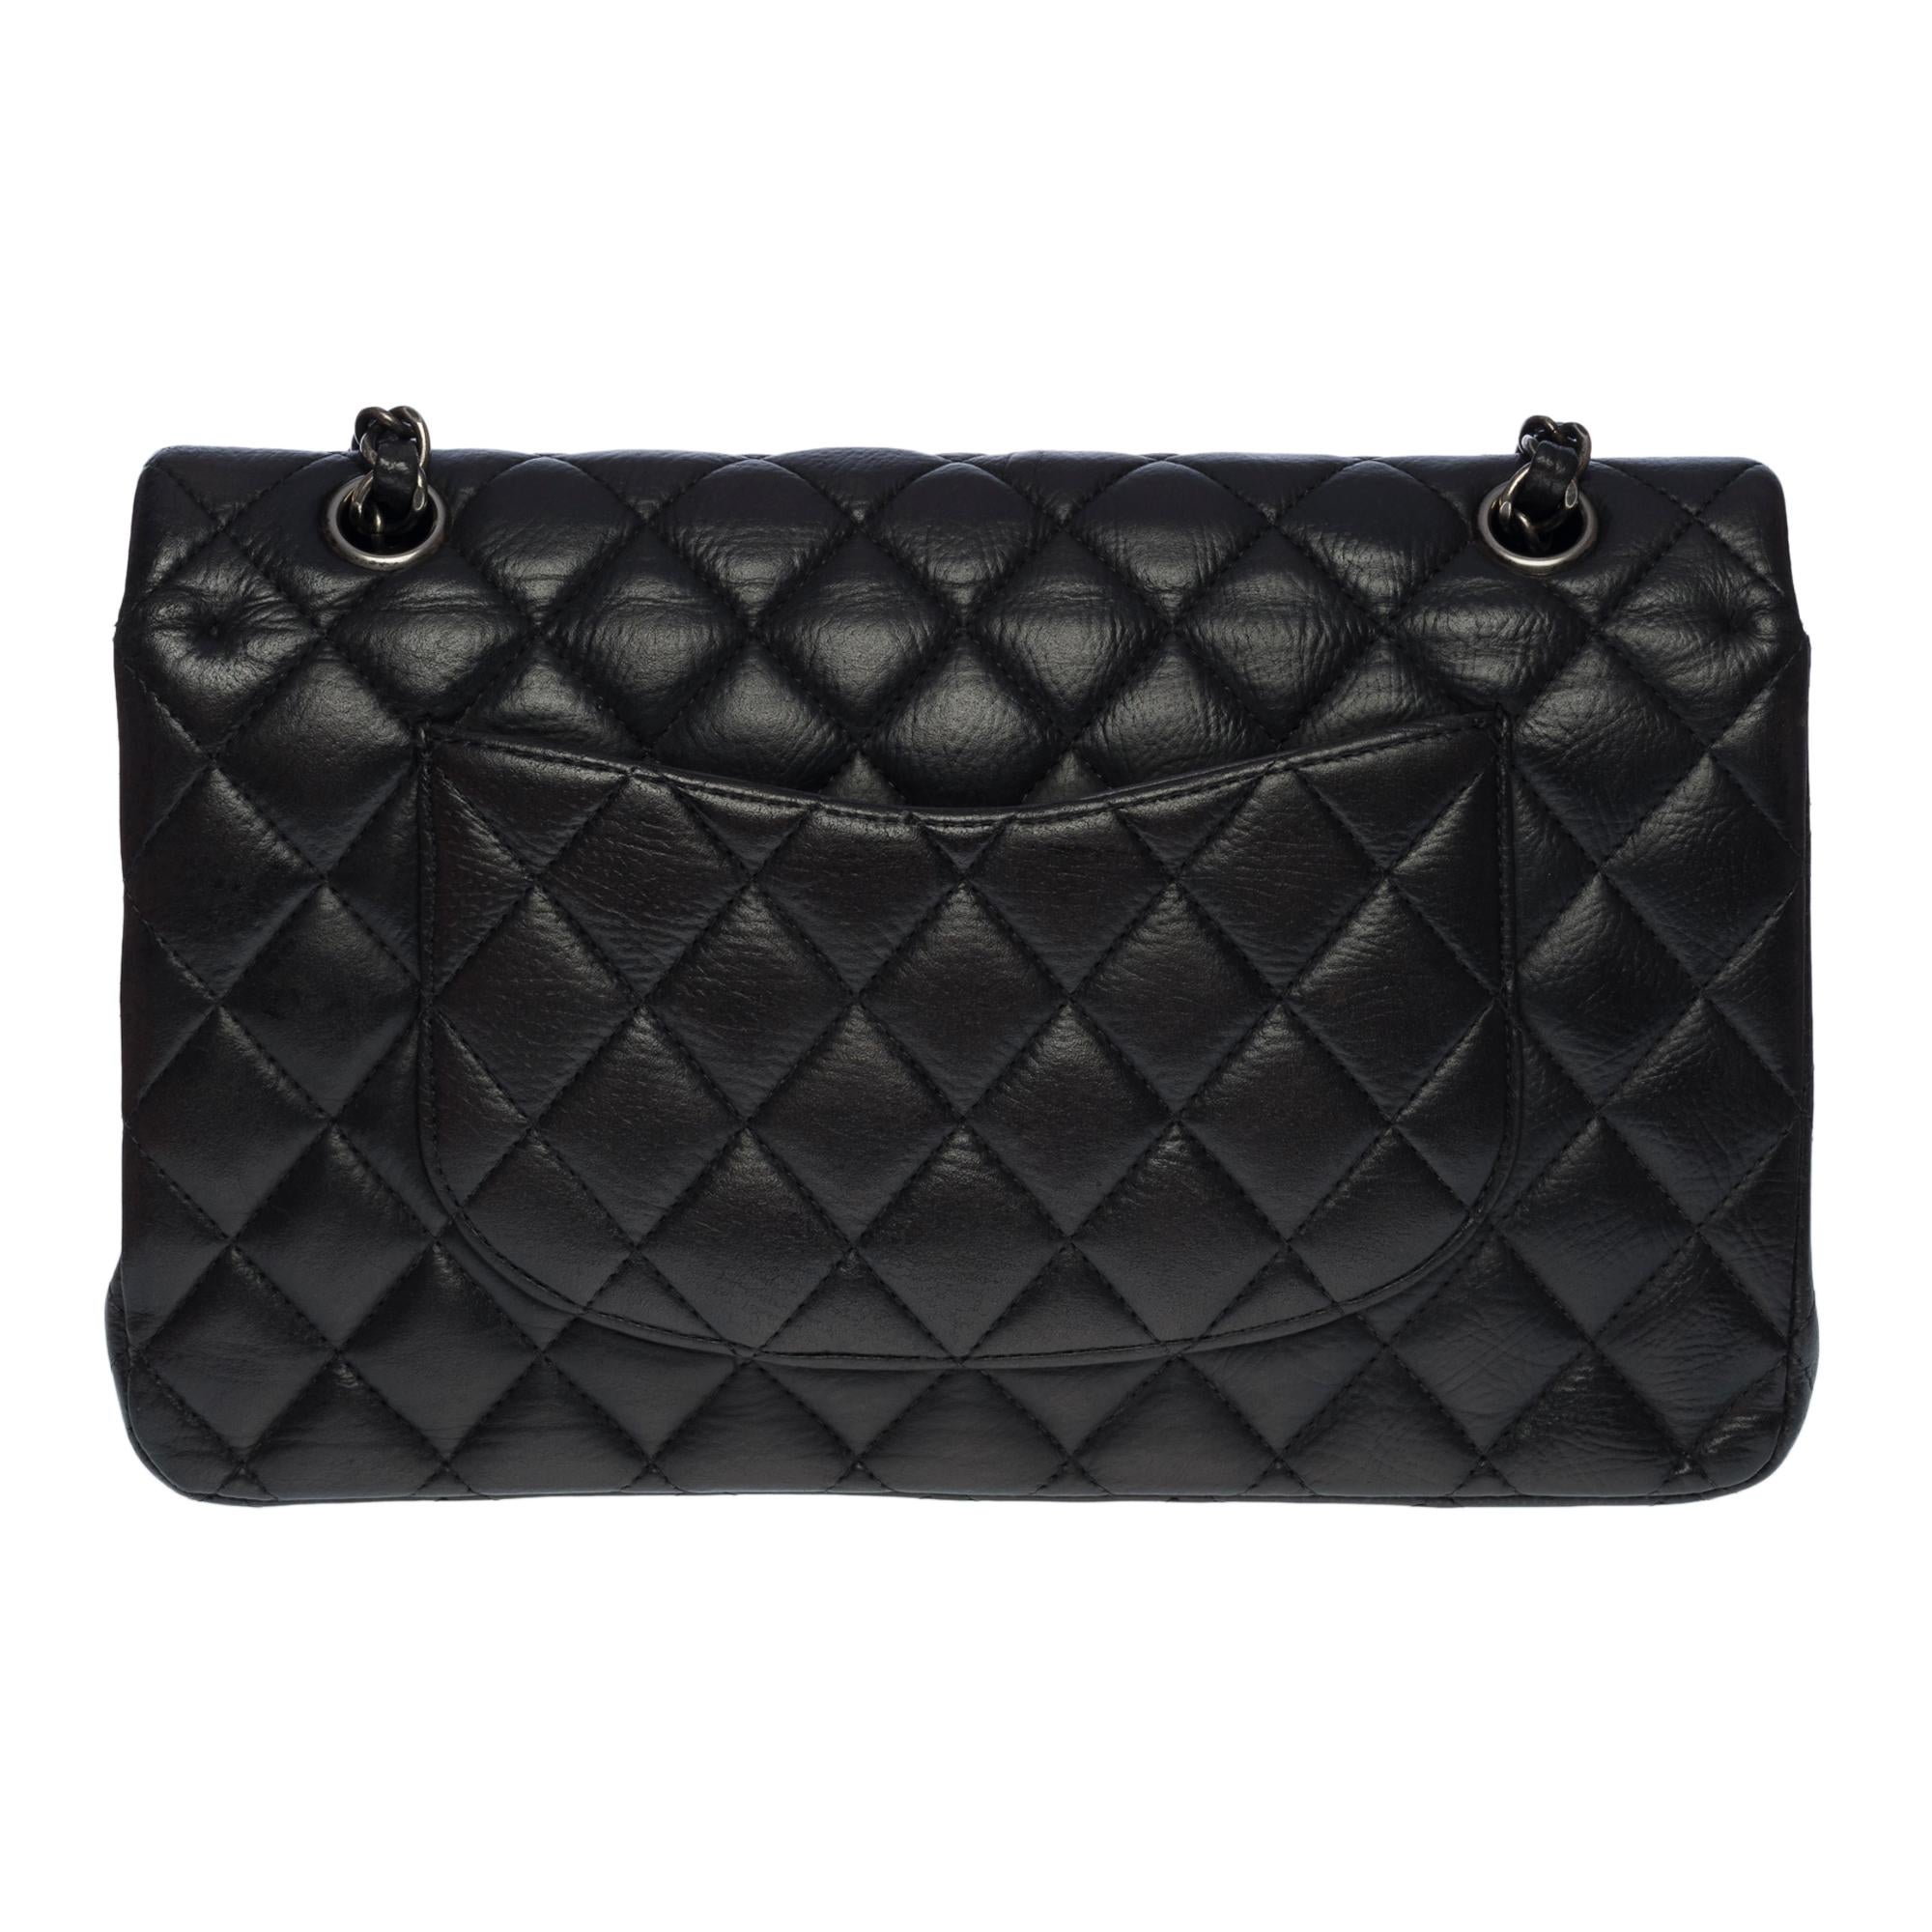 Amazing Chanel Timeless medium 25cm shoulder double flap bag limited edition in black quilted grained leather, ruthenium metal hardware, black leather interlaced ruthenium metal chain for a shoulder and shoulder strap
Backpack pocket
Closure by